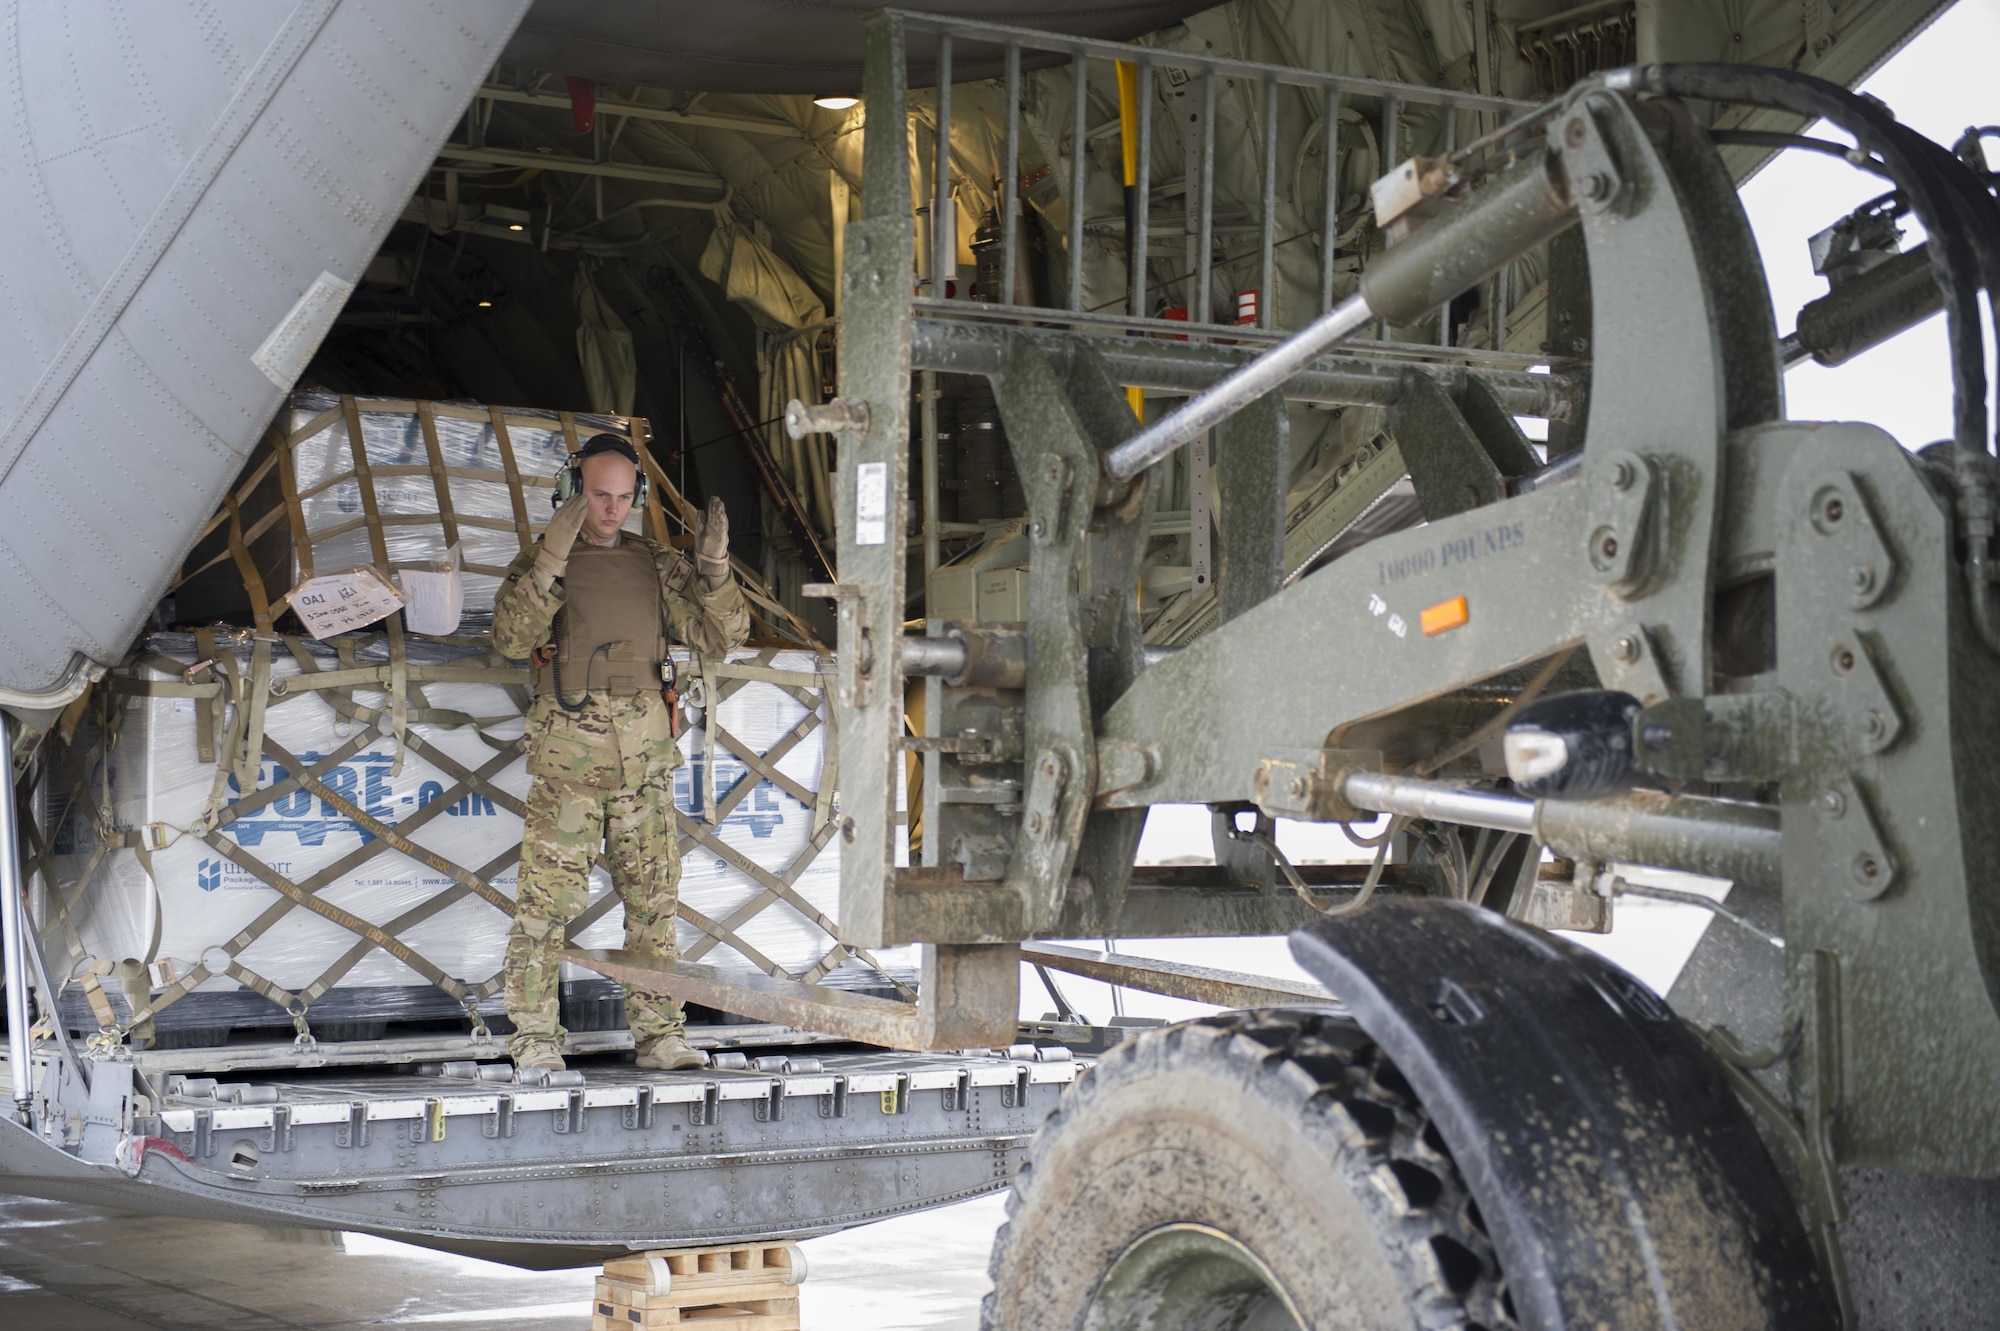 Staff Sgt. Justin King, a 774th Expeditionary Airlift Squadron loadmaster, guides a forklift toward the aft loading ramp of a C-130J Super Hercules at Camp Bastion, Afghanistan, Jan. 3, 2016. Loadmasters are responsible for calculating aircraft weight, balancing records and cargo manifests, conducting cargo and personnel airdrops, and troubleshooting in-flight problems. King is deployed from Dyess Air Force Base, Texas. (U.S. Air Force photo/Tech. Sgt. Robert Cloys)